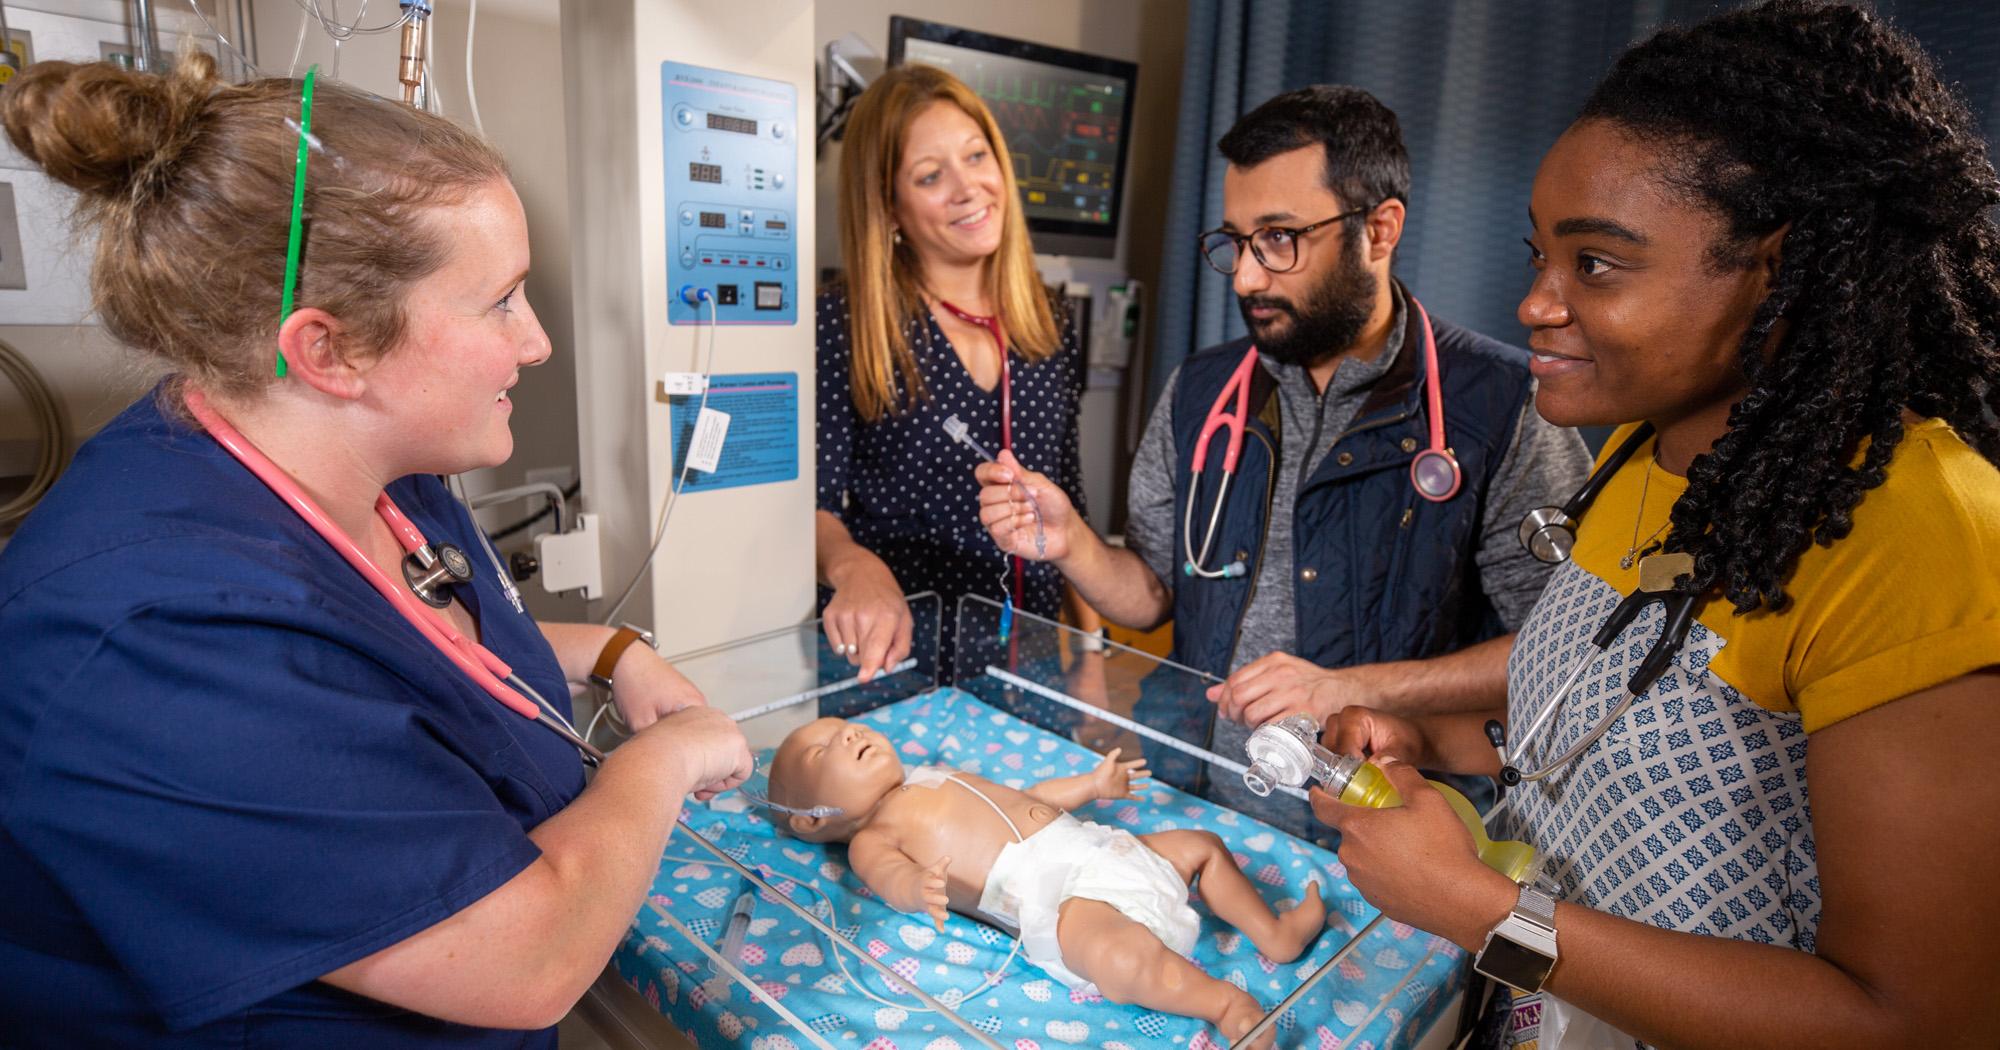 College of Medicine offers hands-on learning 